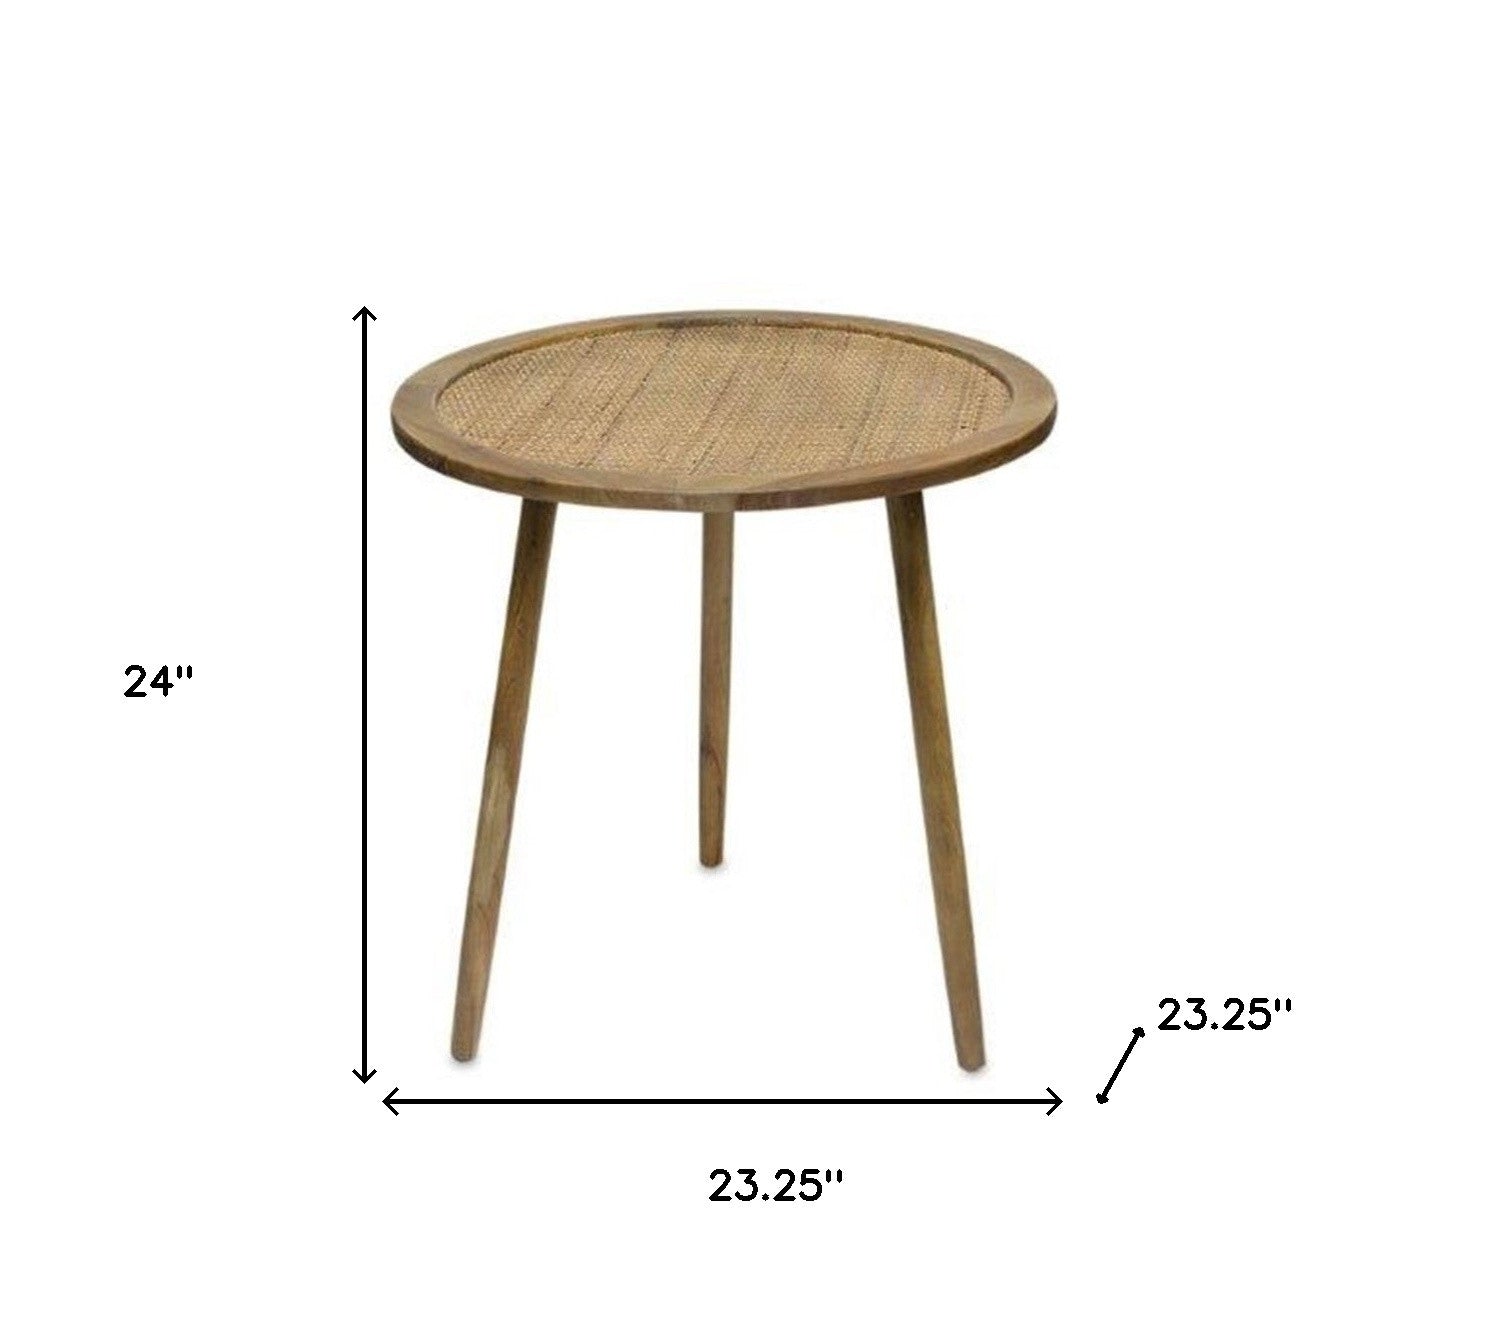 Set of Three 24" Brown Round End Tables